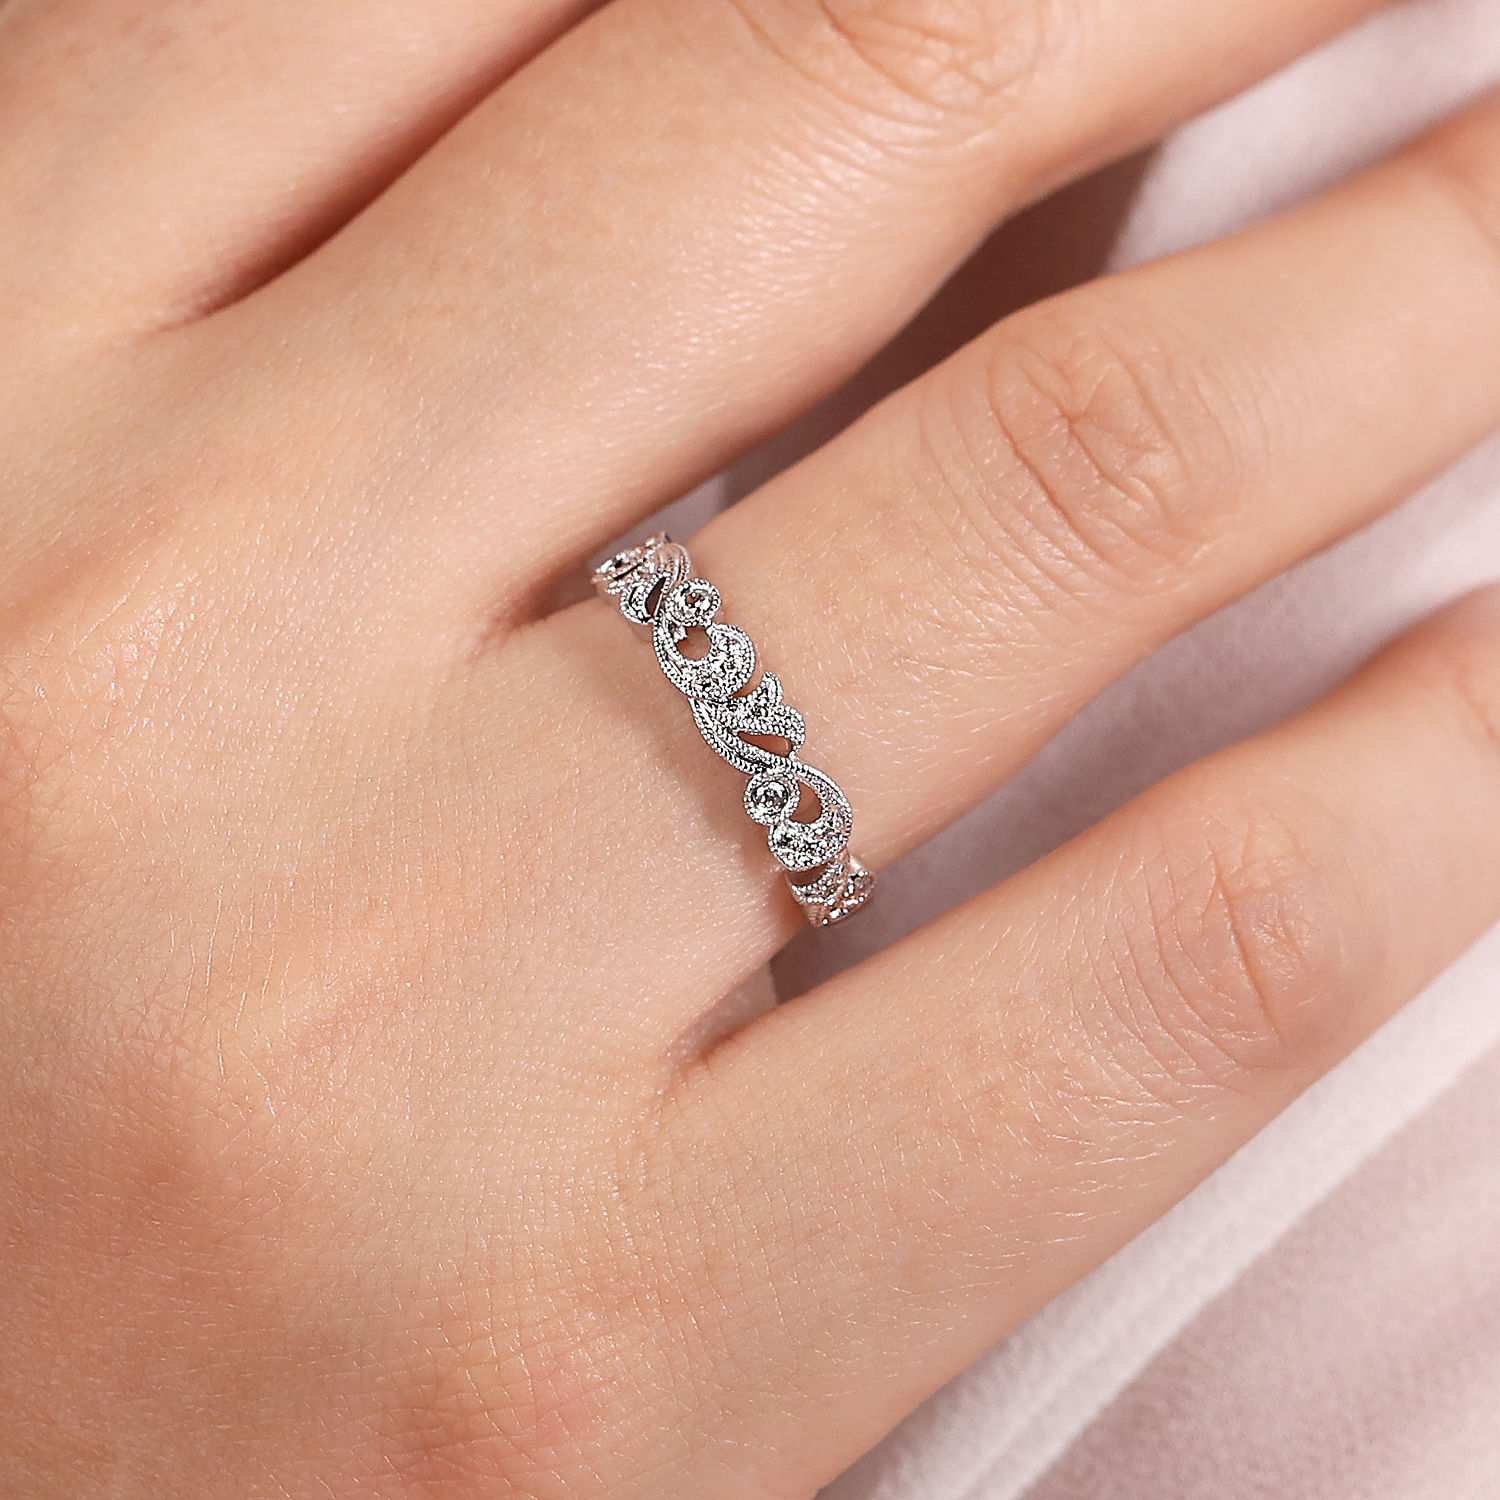 Floral 14K White Gold Diamond Anniversary Band with Millgrain